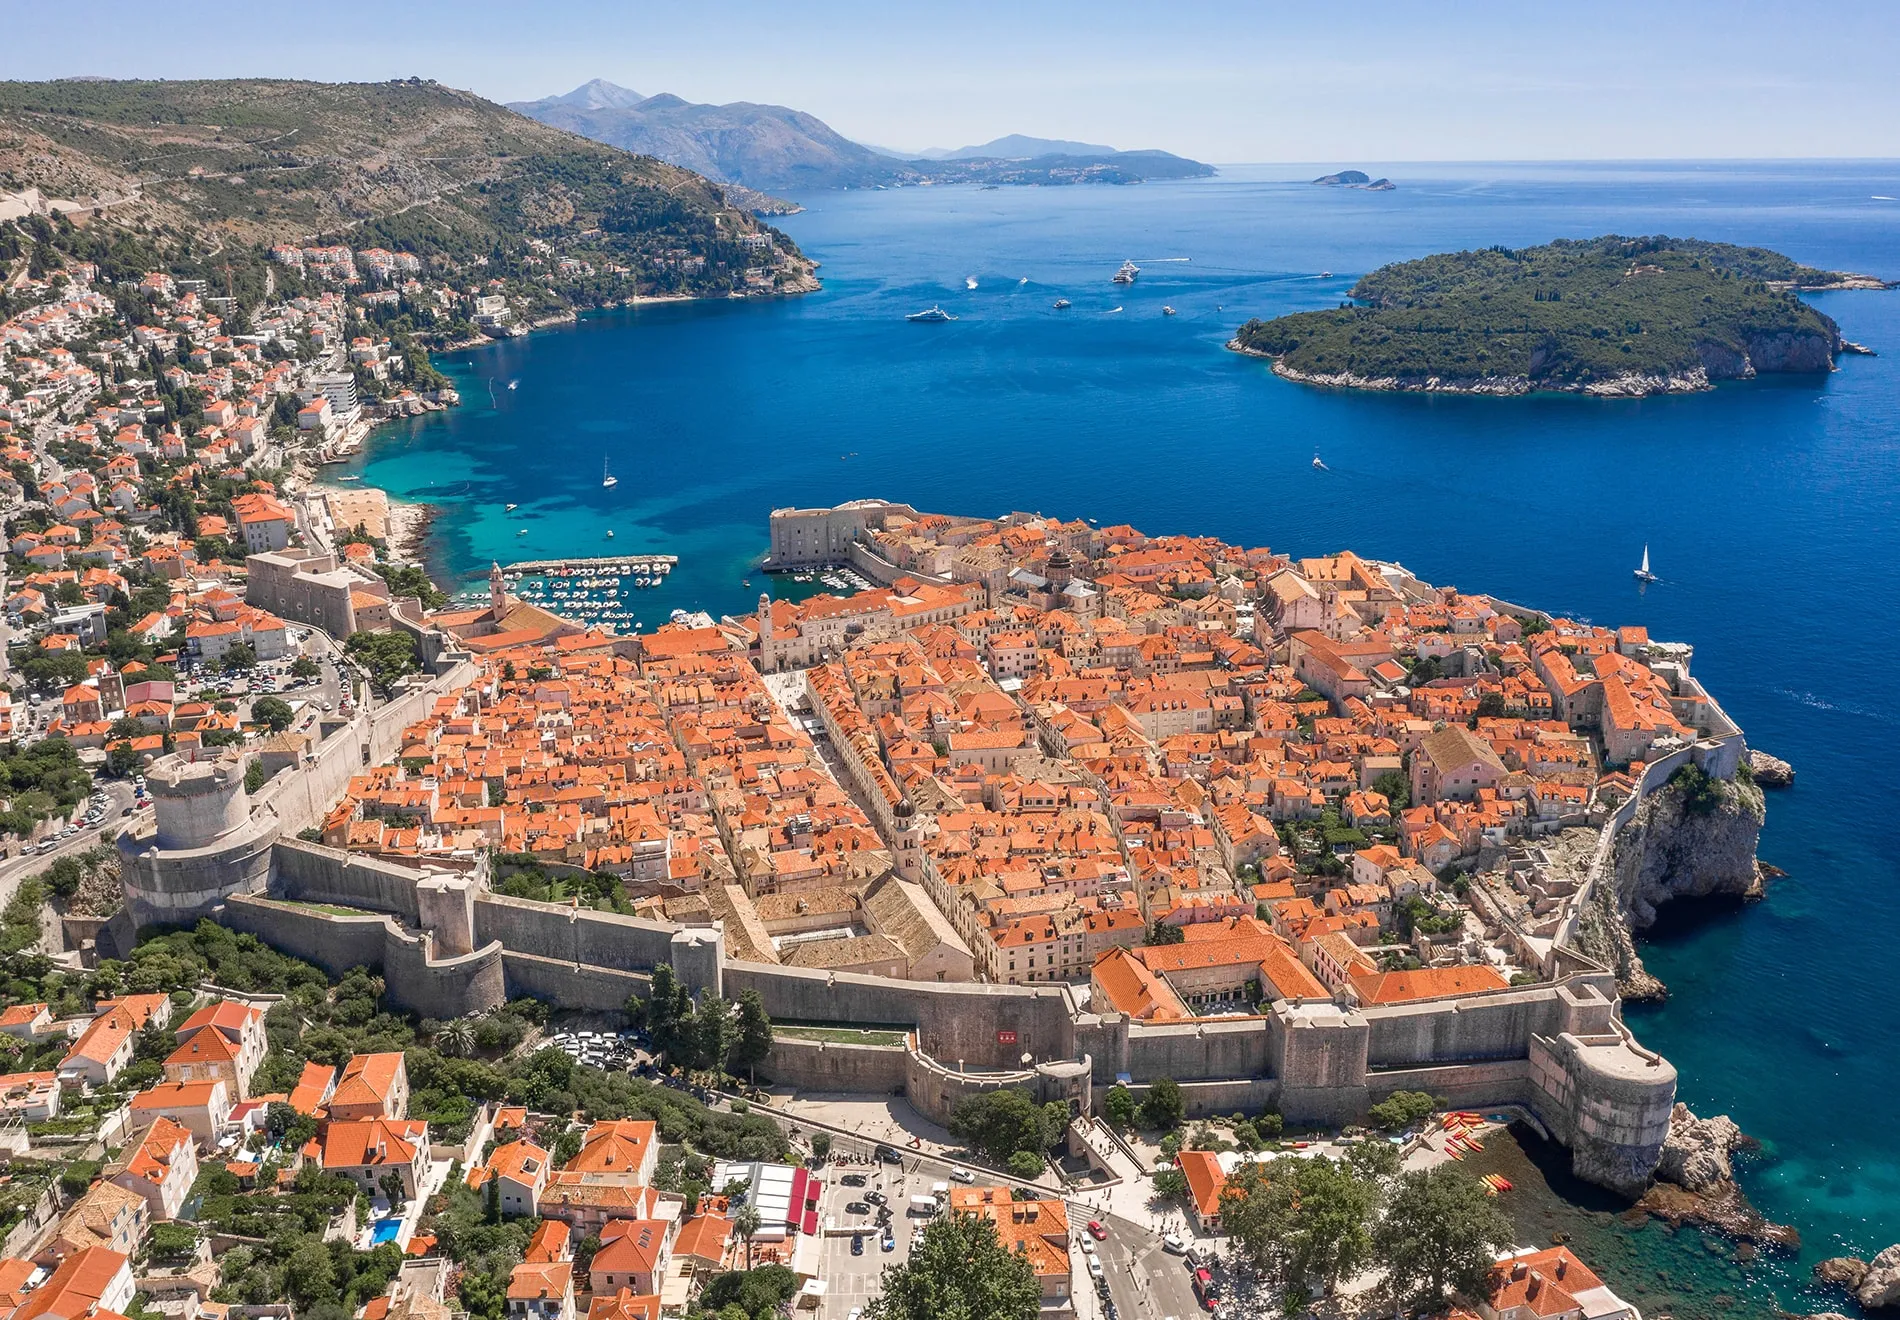 The next one is down towards Dubrovnik, where Ston is a must-stop, heading up to the fortress and eating the most